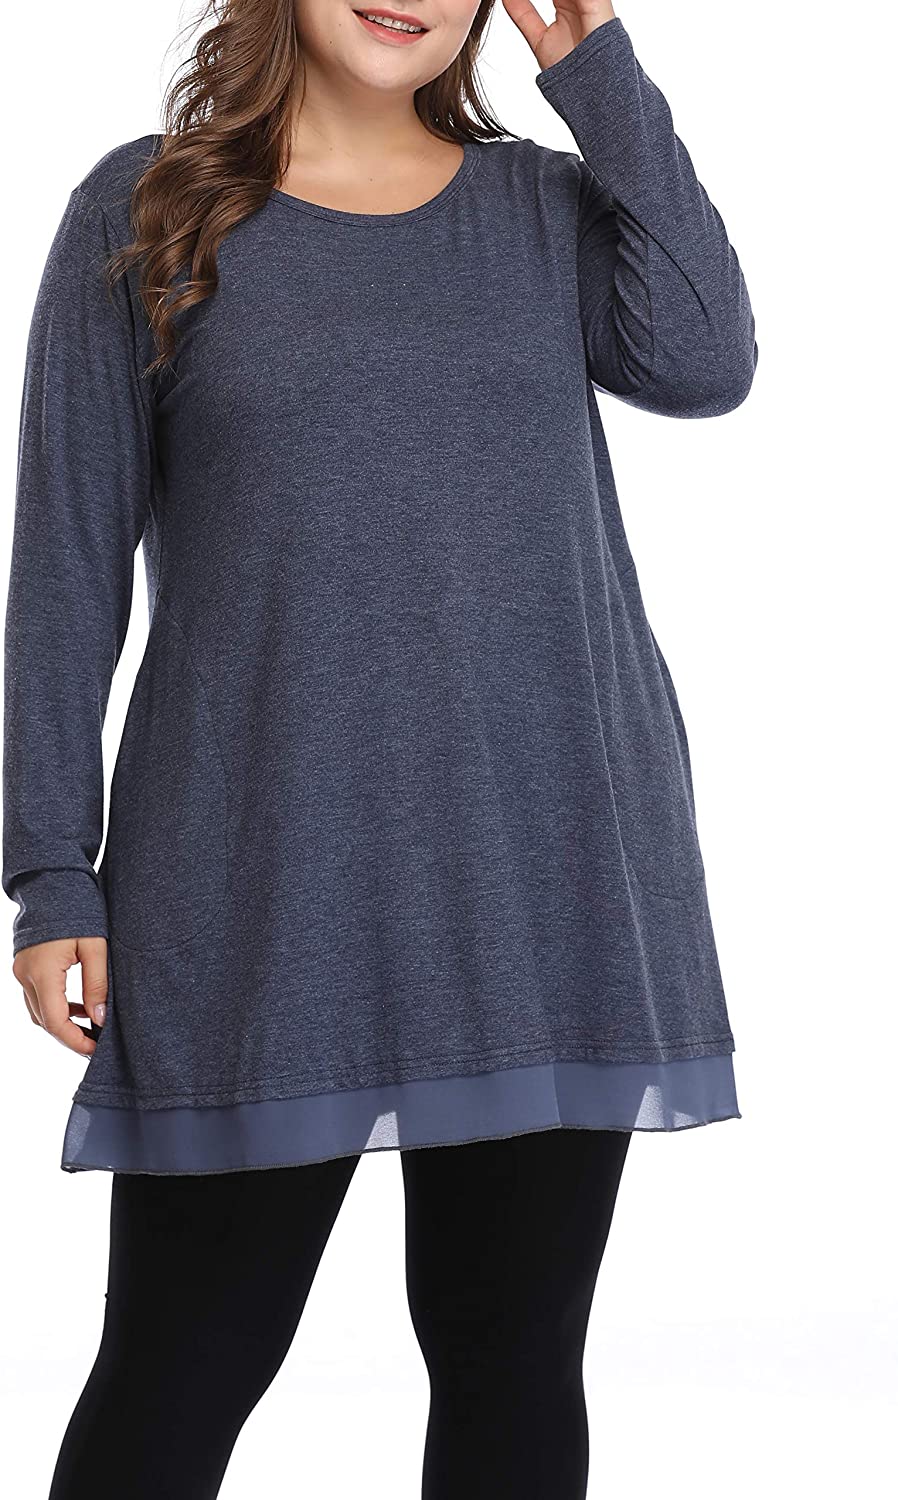 Purchase Wholesale tunic tops with leggings. Free Returns & Net 60